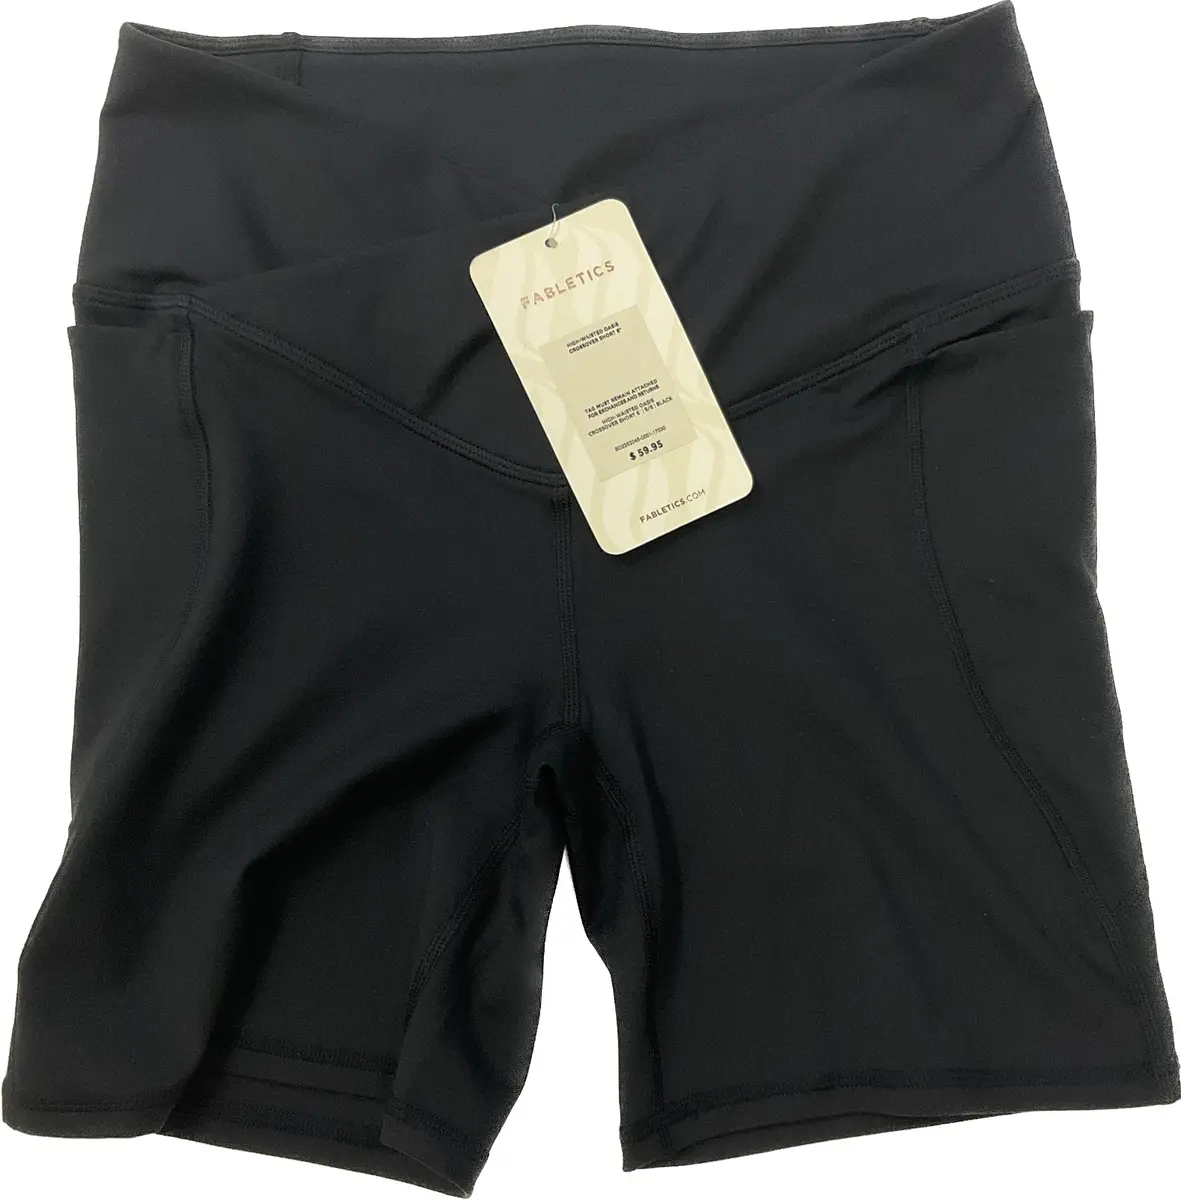 Fabletics High Waisted Oasis Crossover Shorts Womens Size S 6 Inch Black